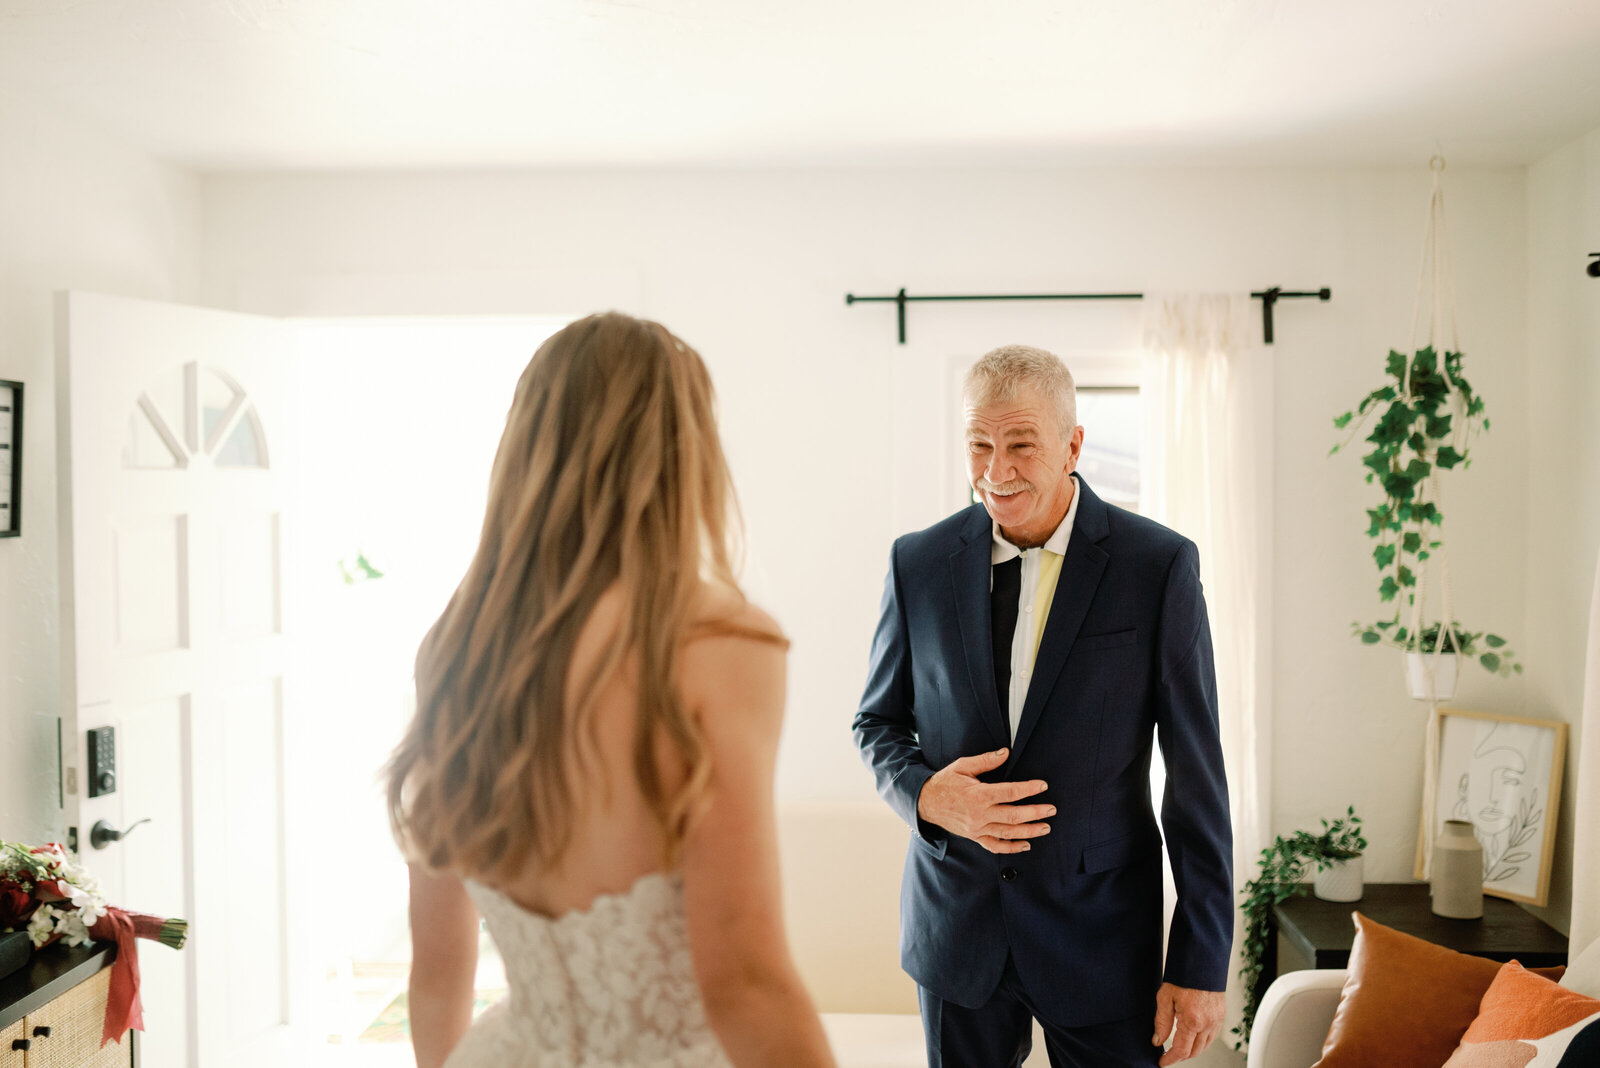 a first look with the bride and her father. Dad is smiling with his hand over his jacket buttons while looking toward his daughter in her wedding dress.